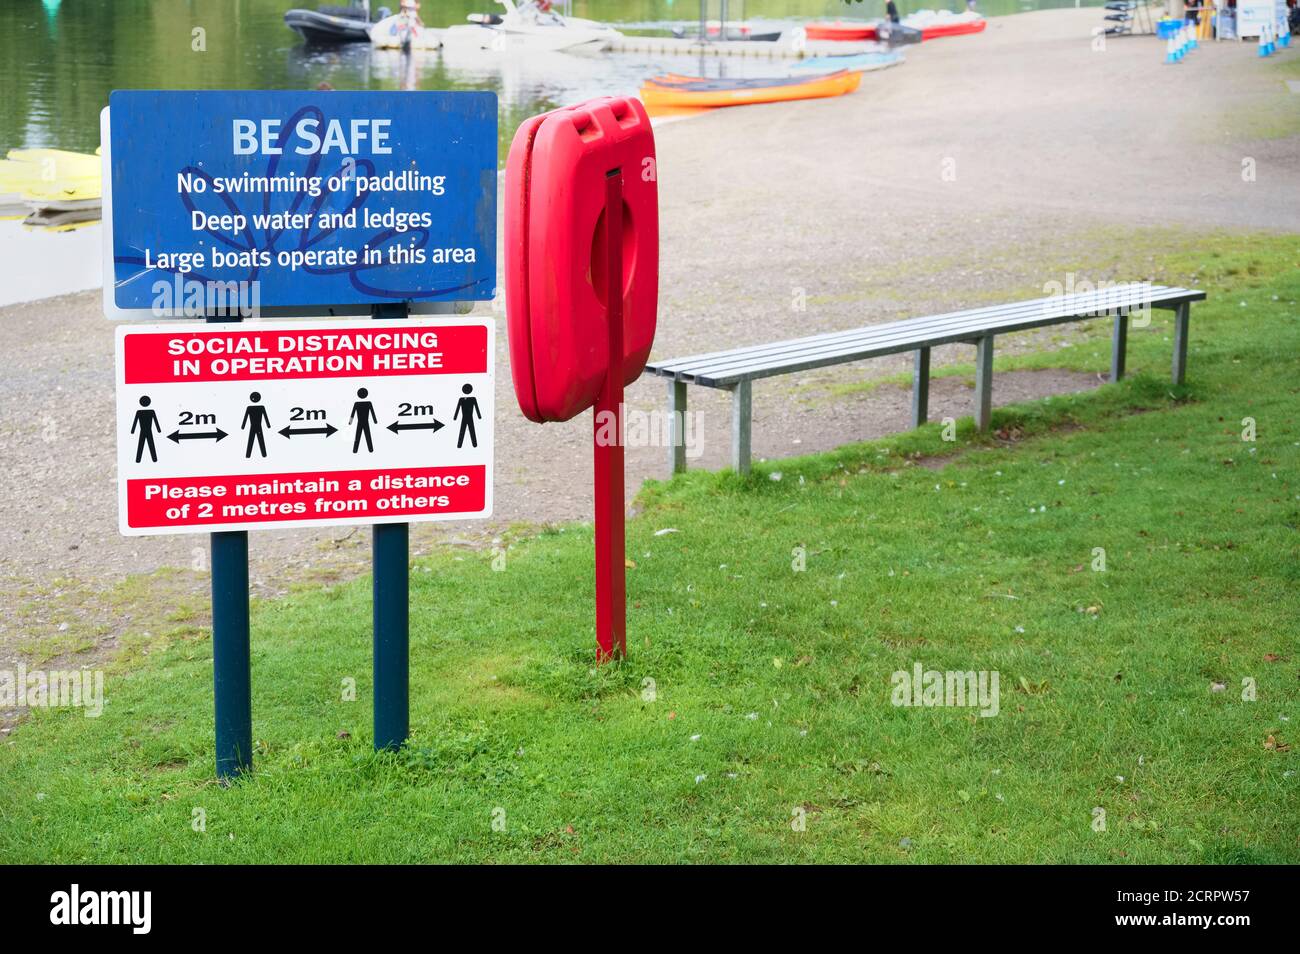 Social distancing sign at outdoor water sport facility Stock Photo